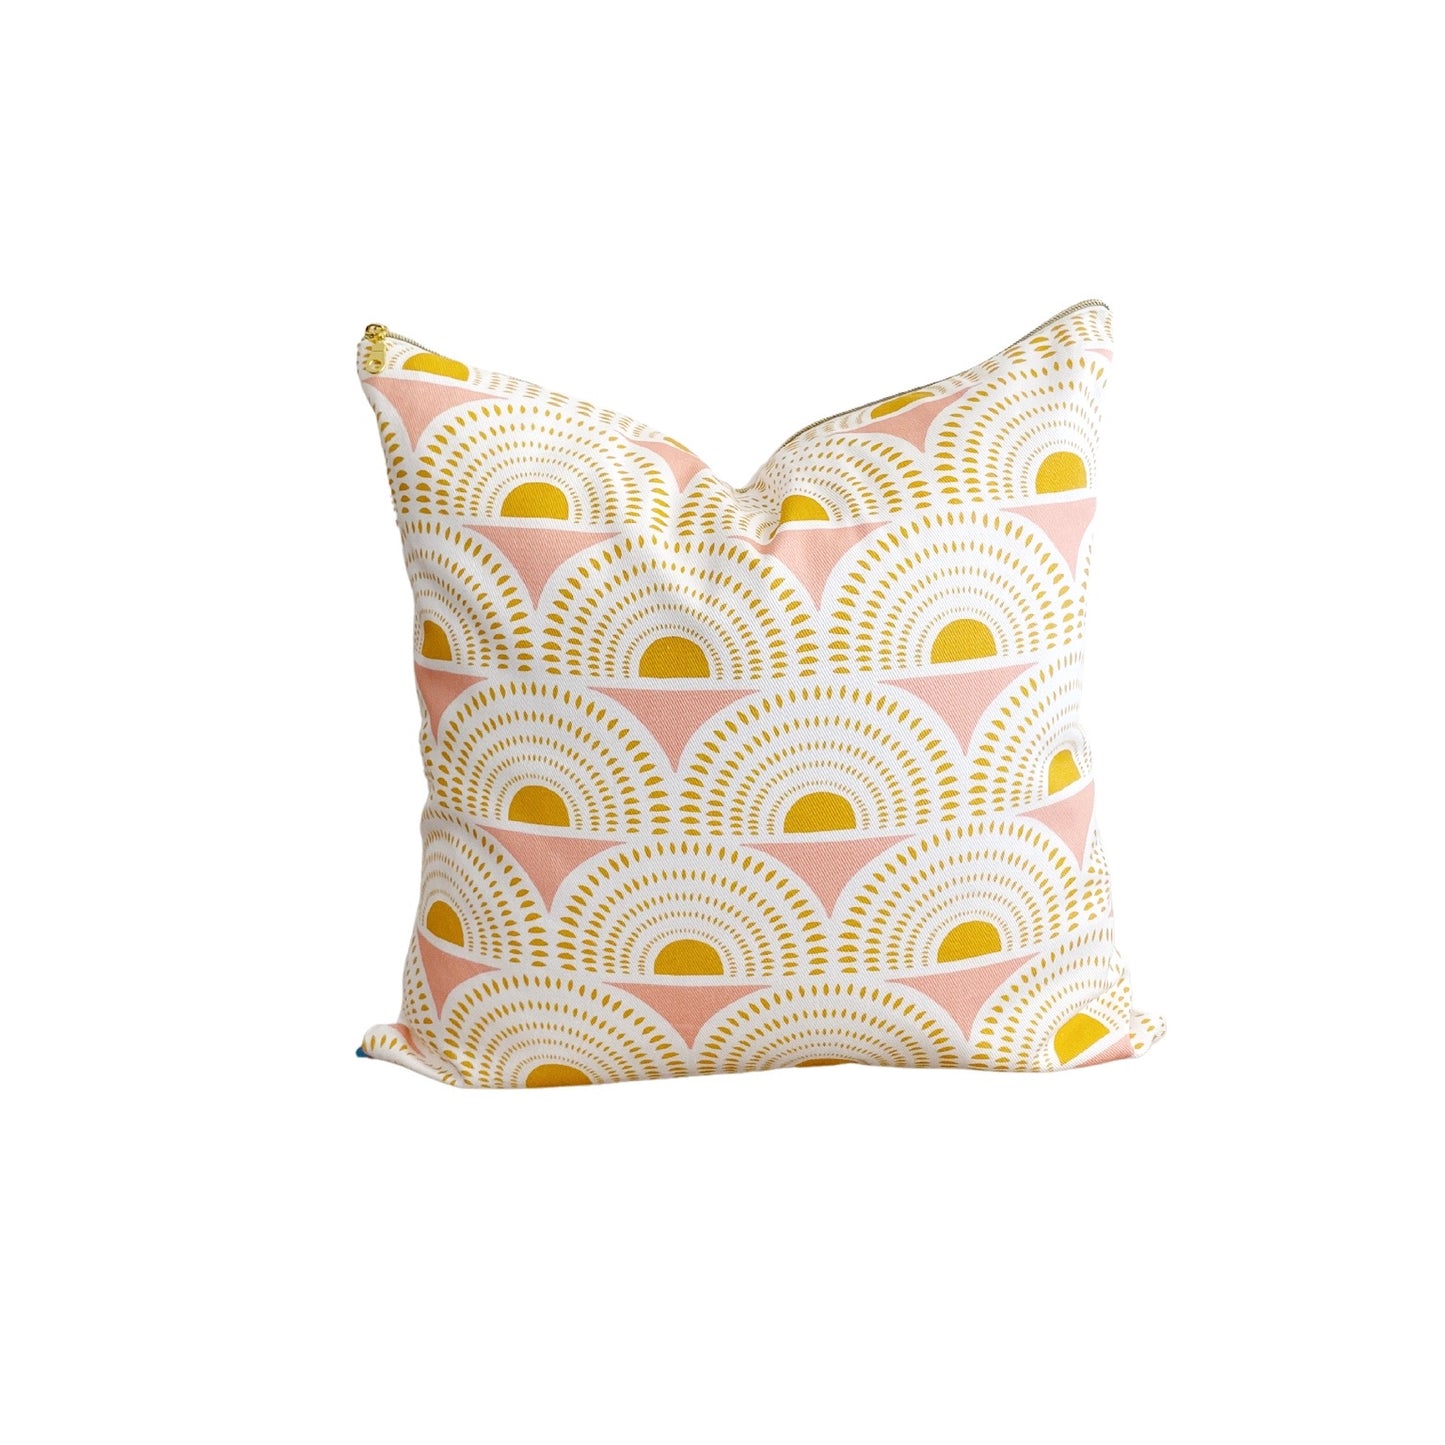 Aurora Blush and Goldenrod Suns Pillow Cover